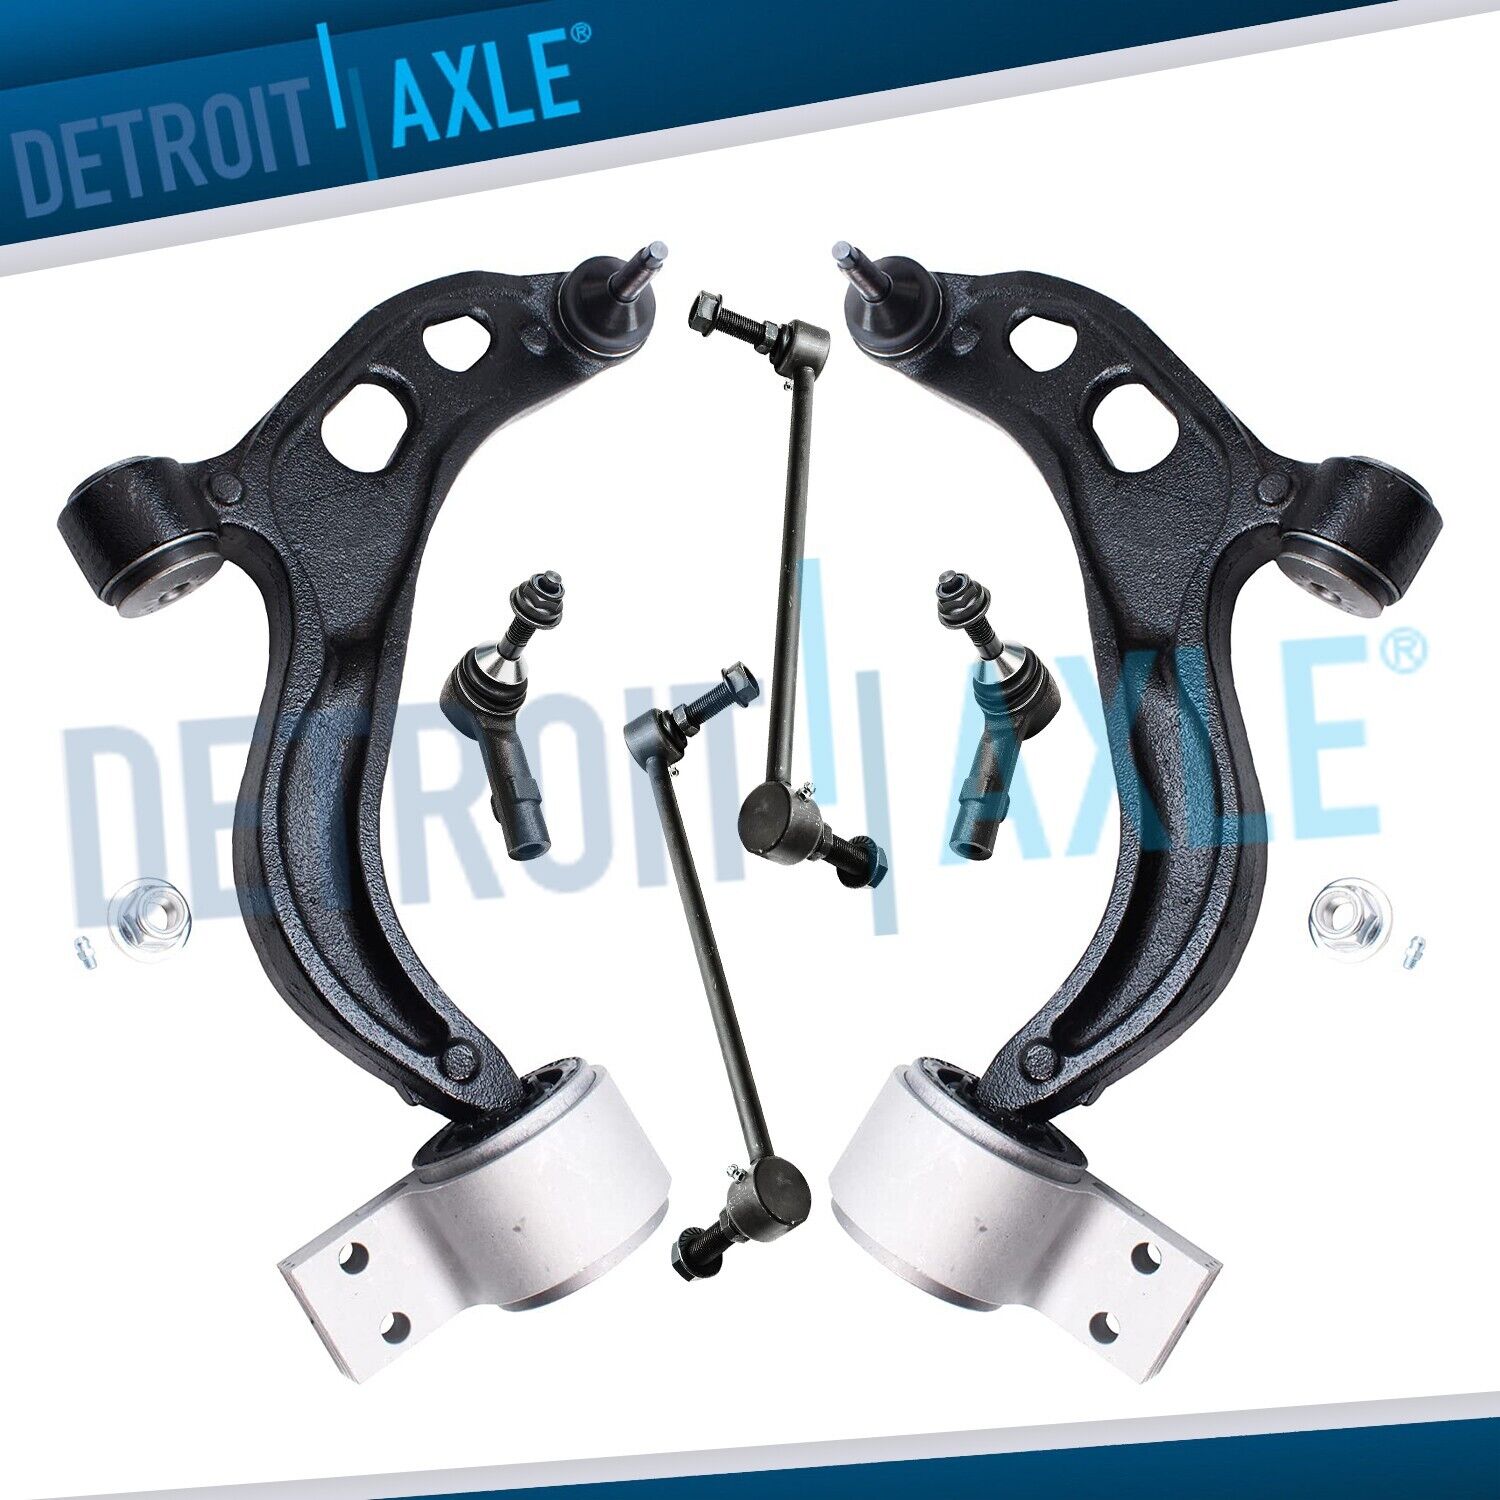 Front Lower Control Arms Sway Bar for 2010-2012 Ford Flex Taurus Lincoln MKS MKT